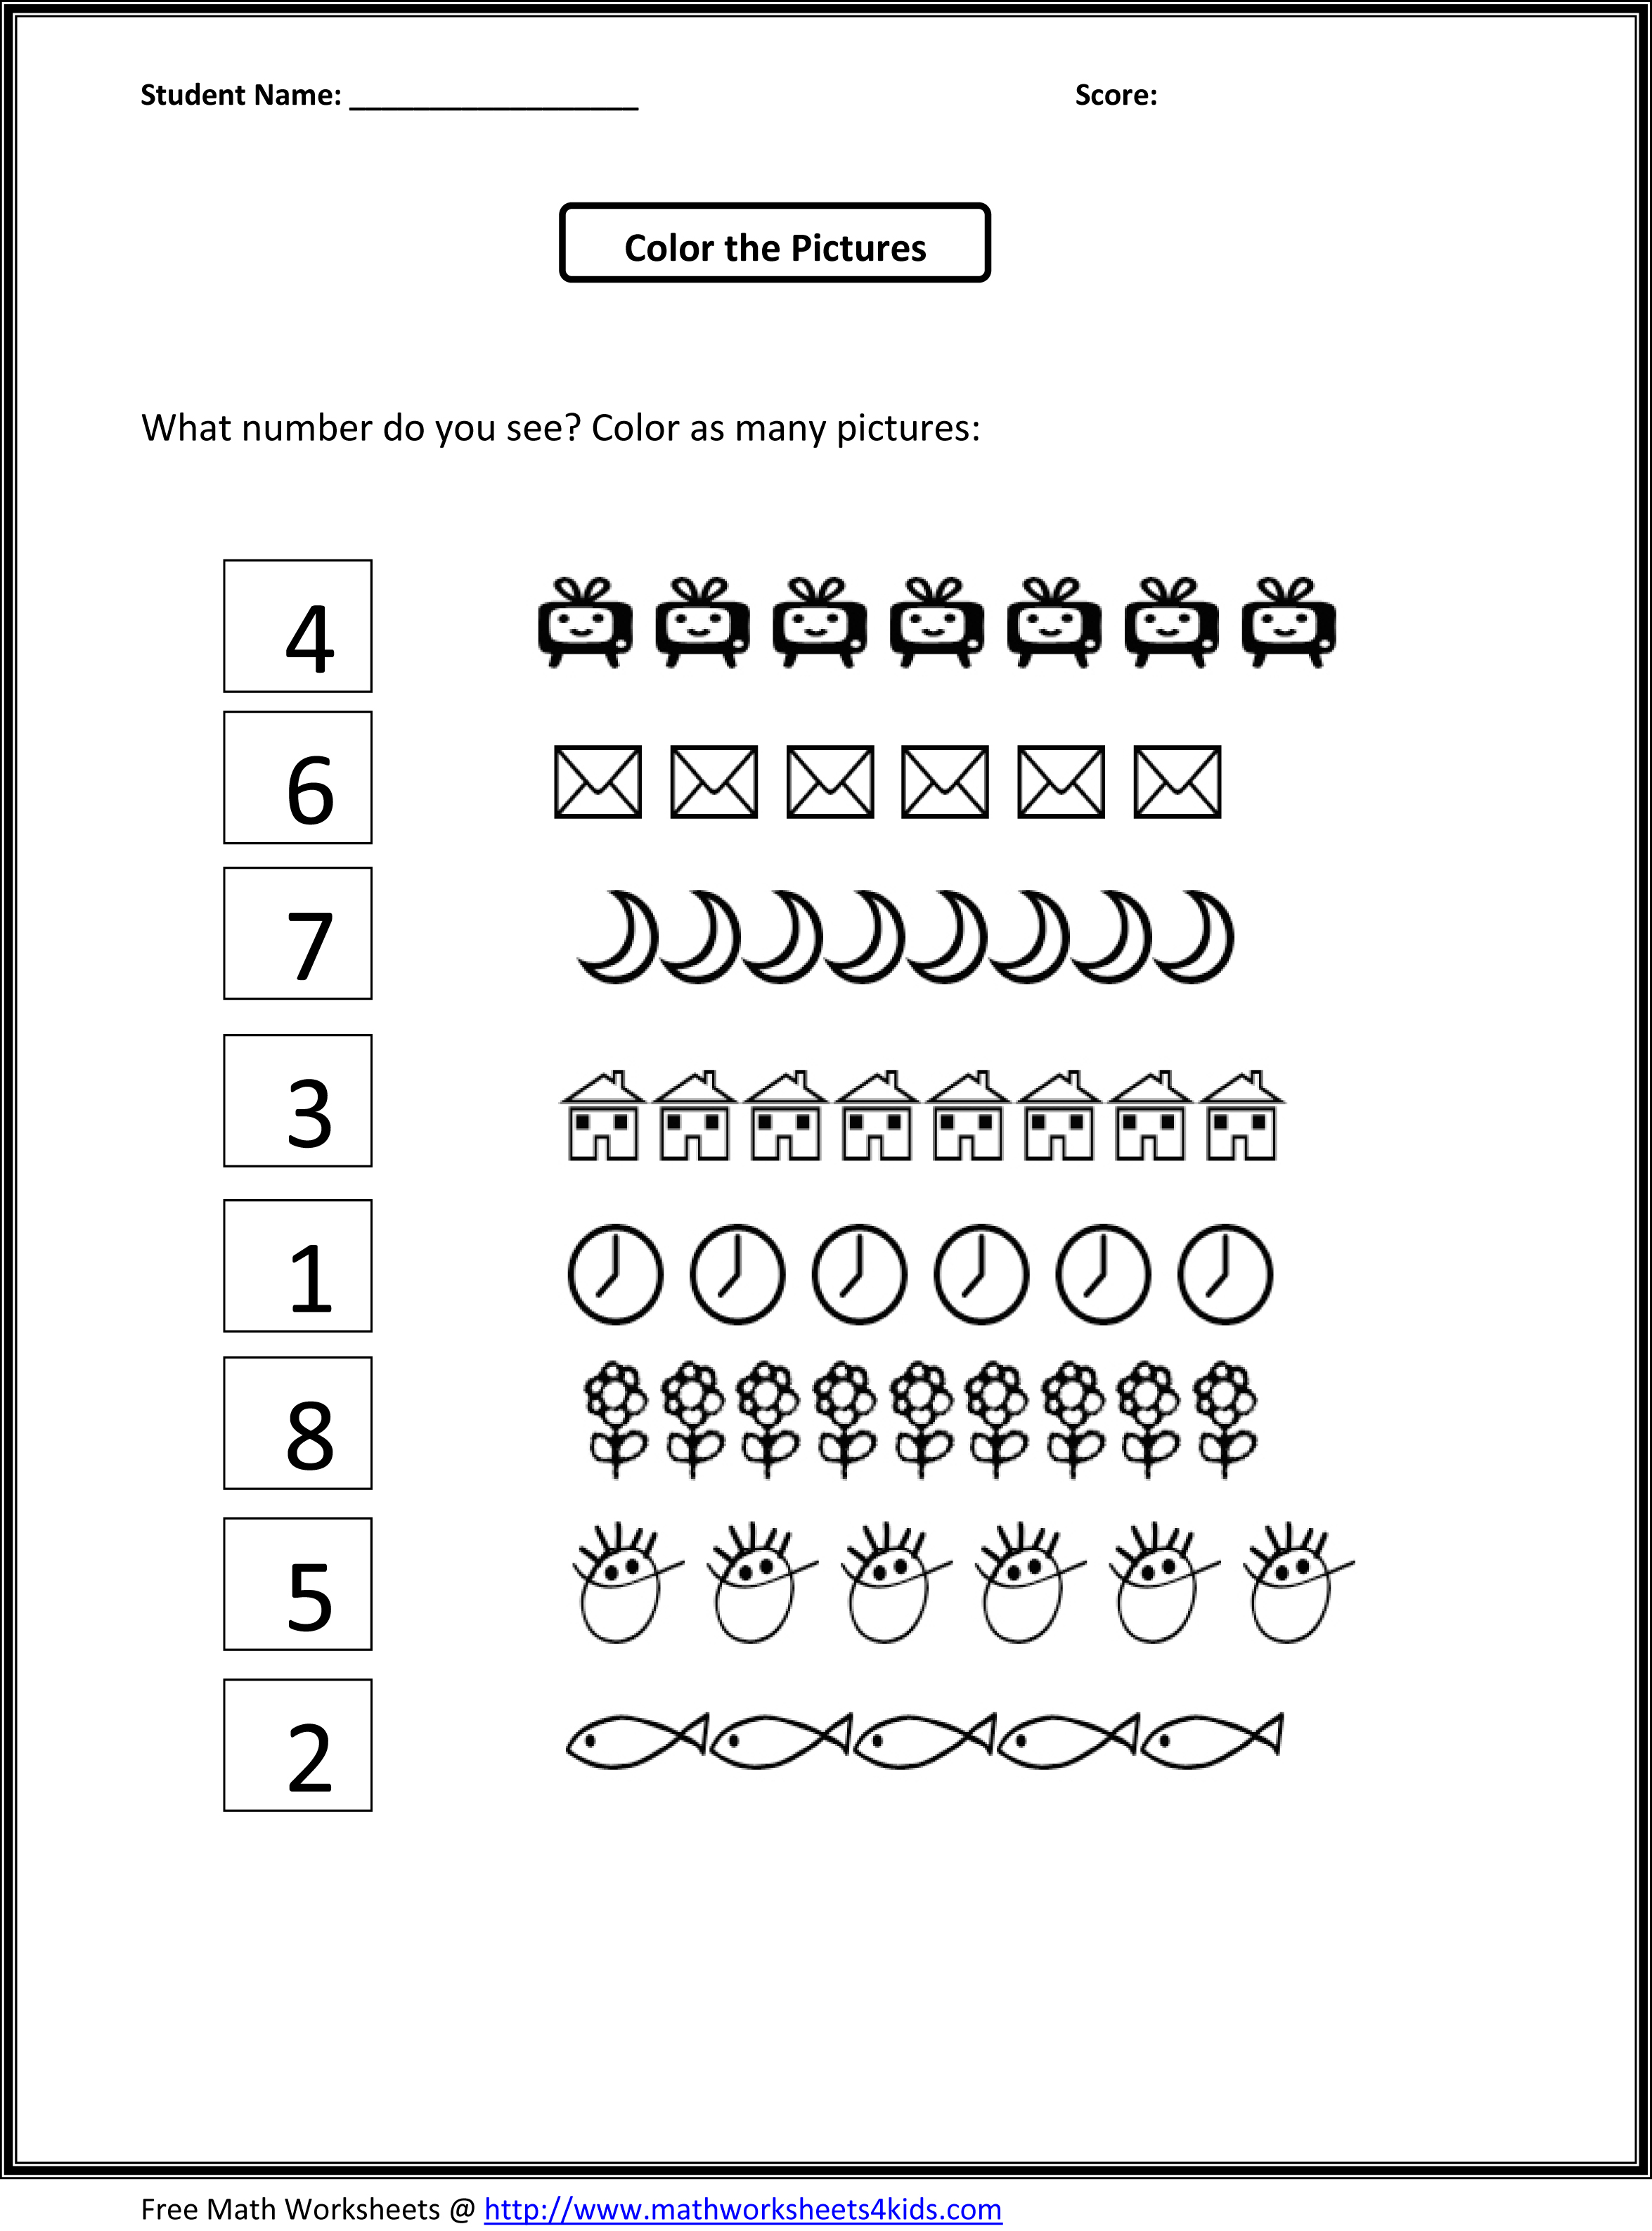 12-best-images-of-math-worksheets-11-20-ordering-numbers-to-20-worksheets-number-bonds